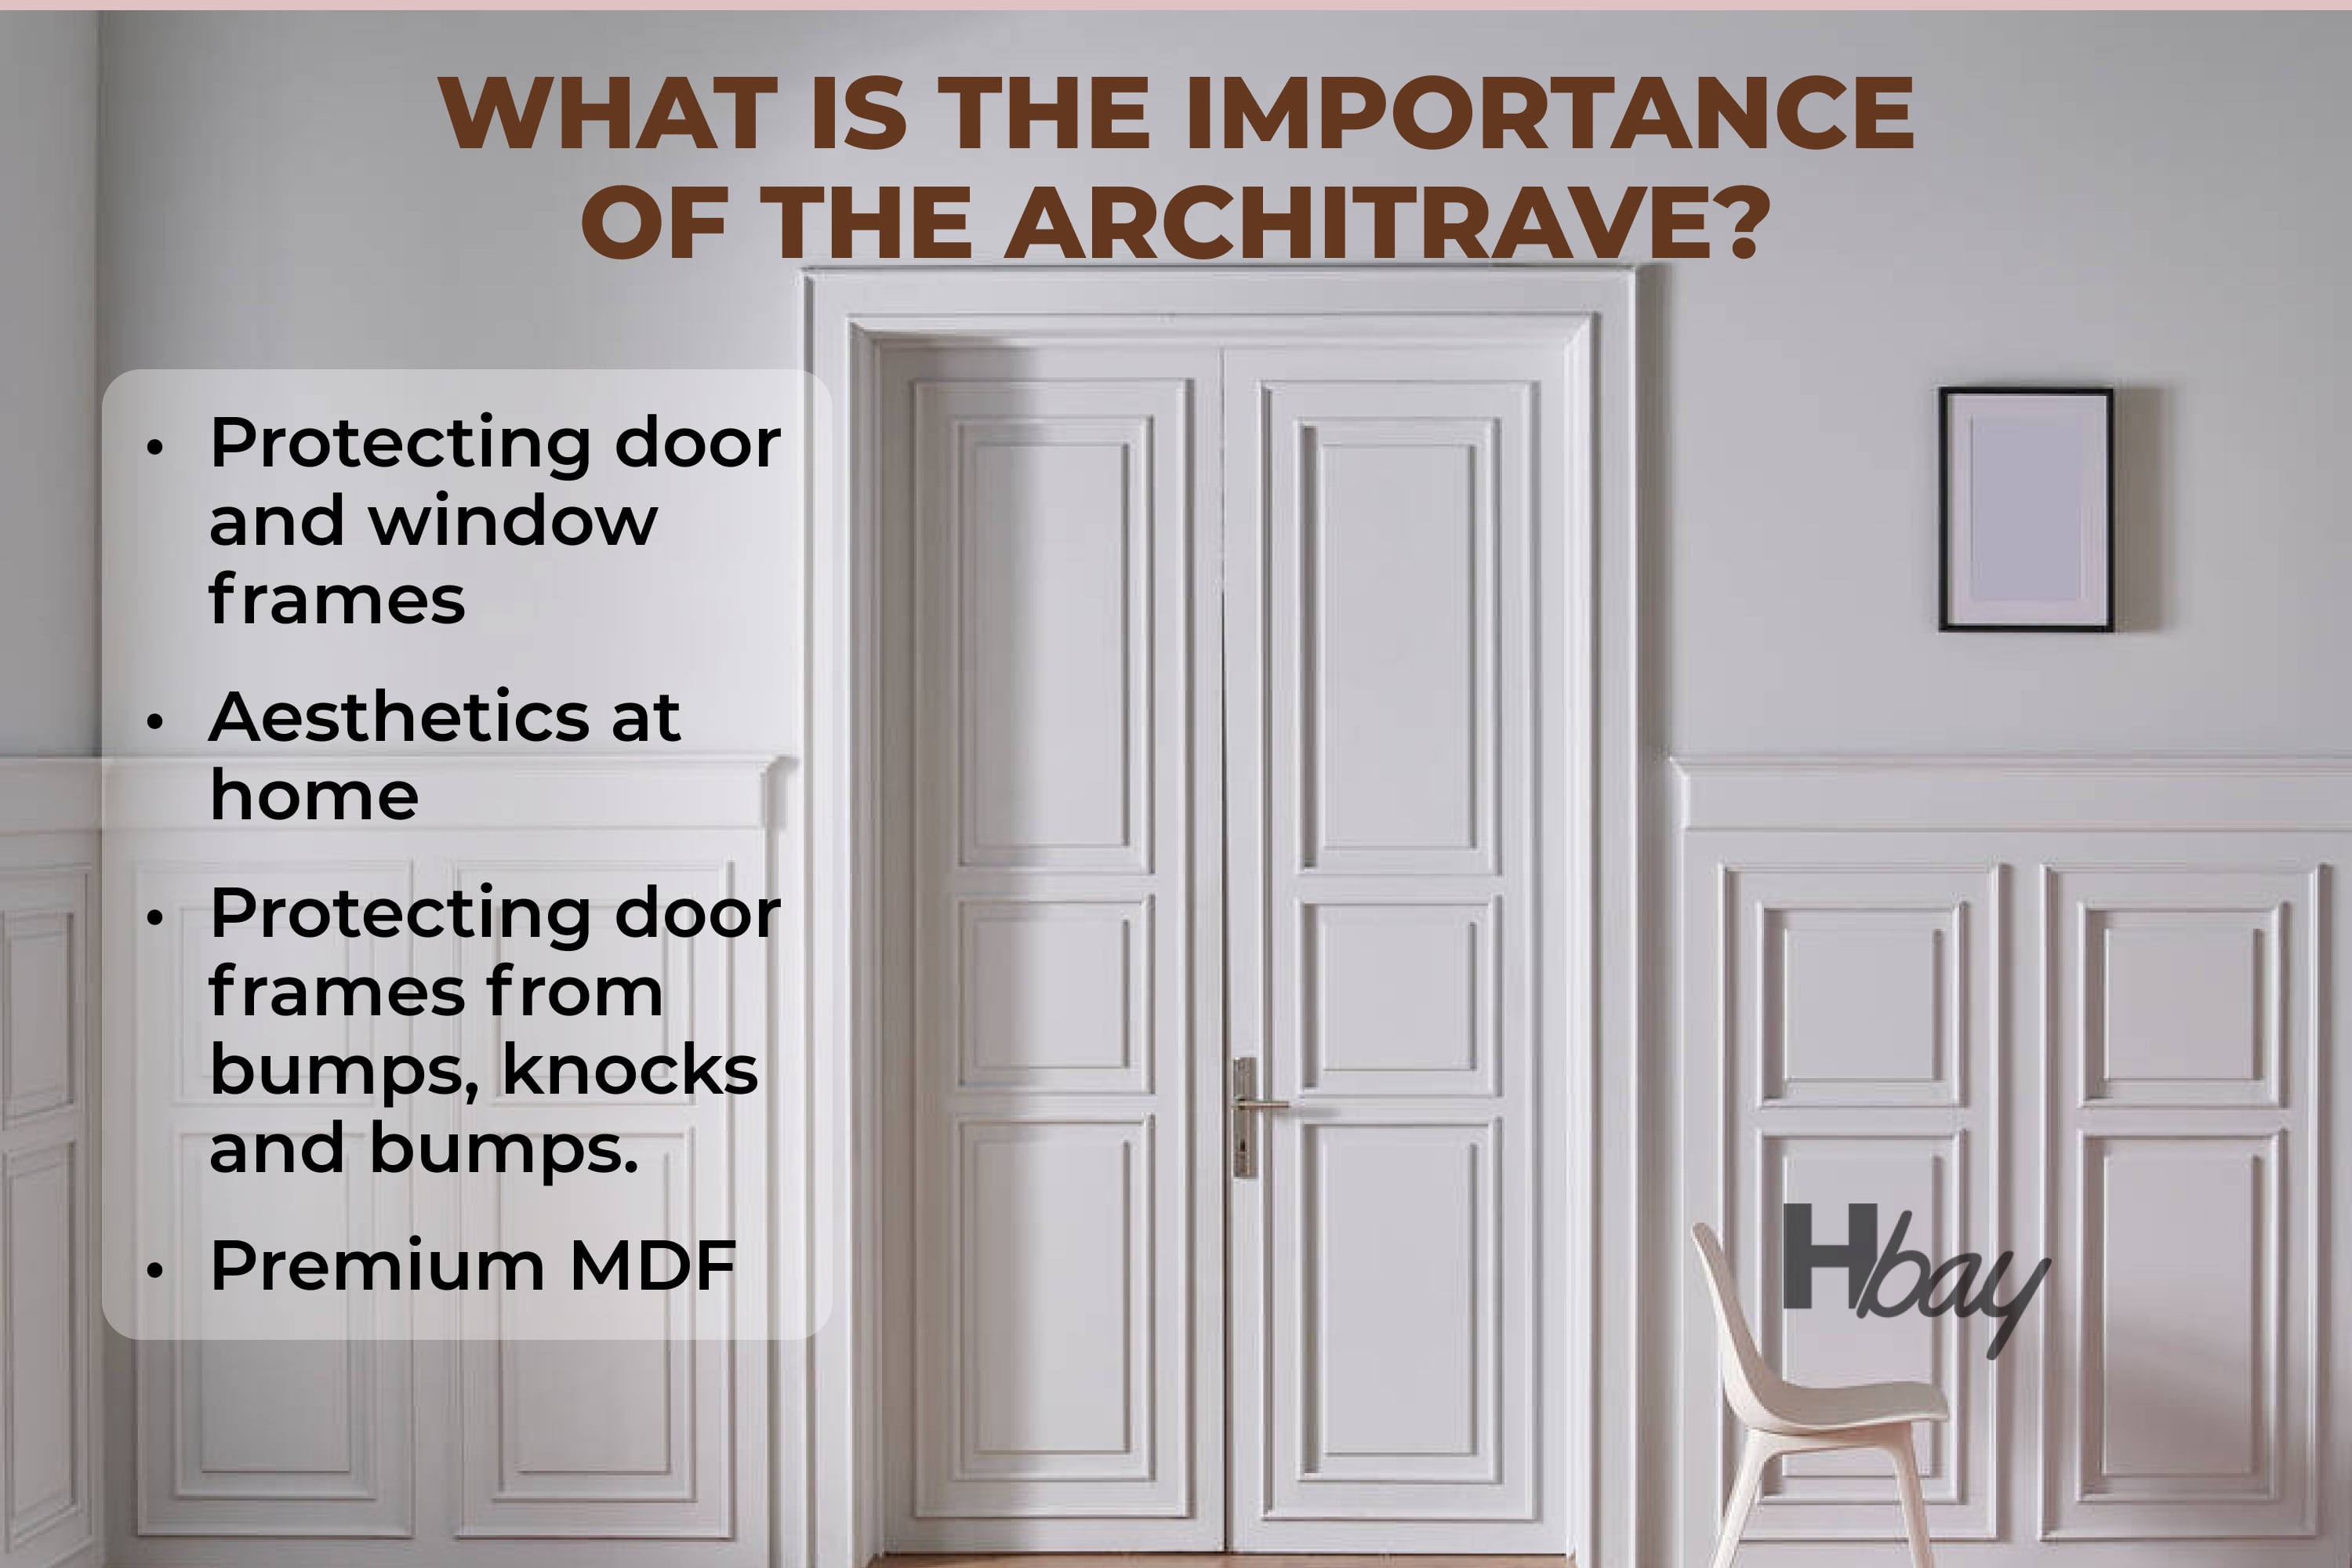 What is the importance of the architrave